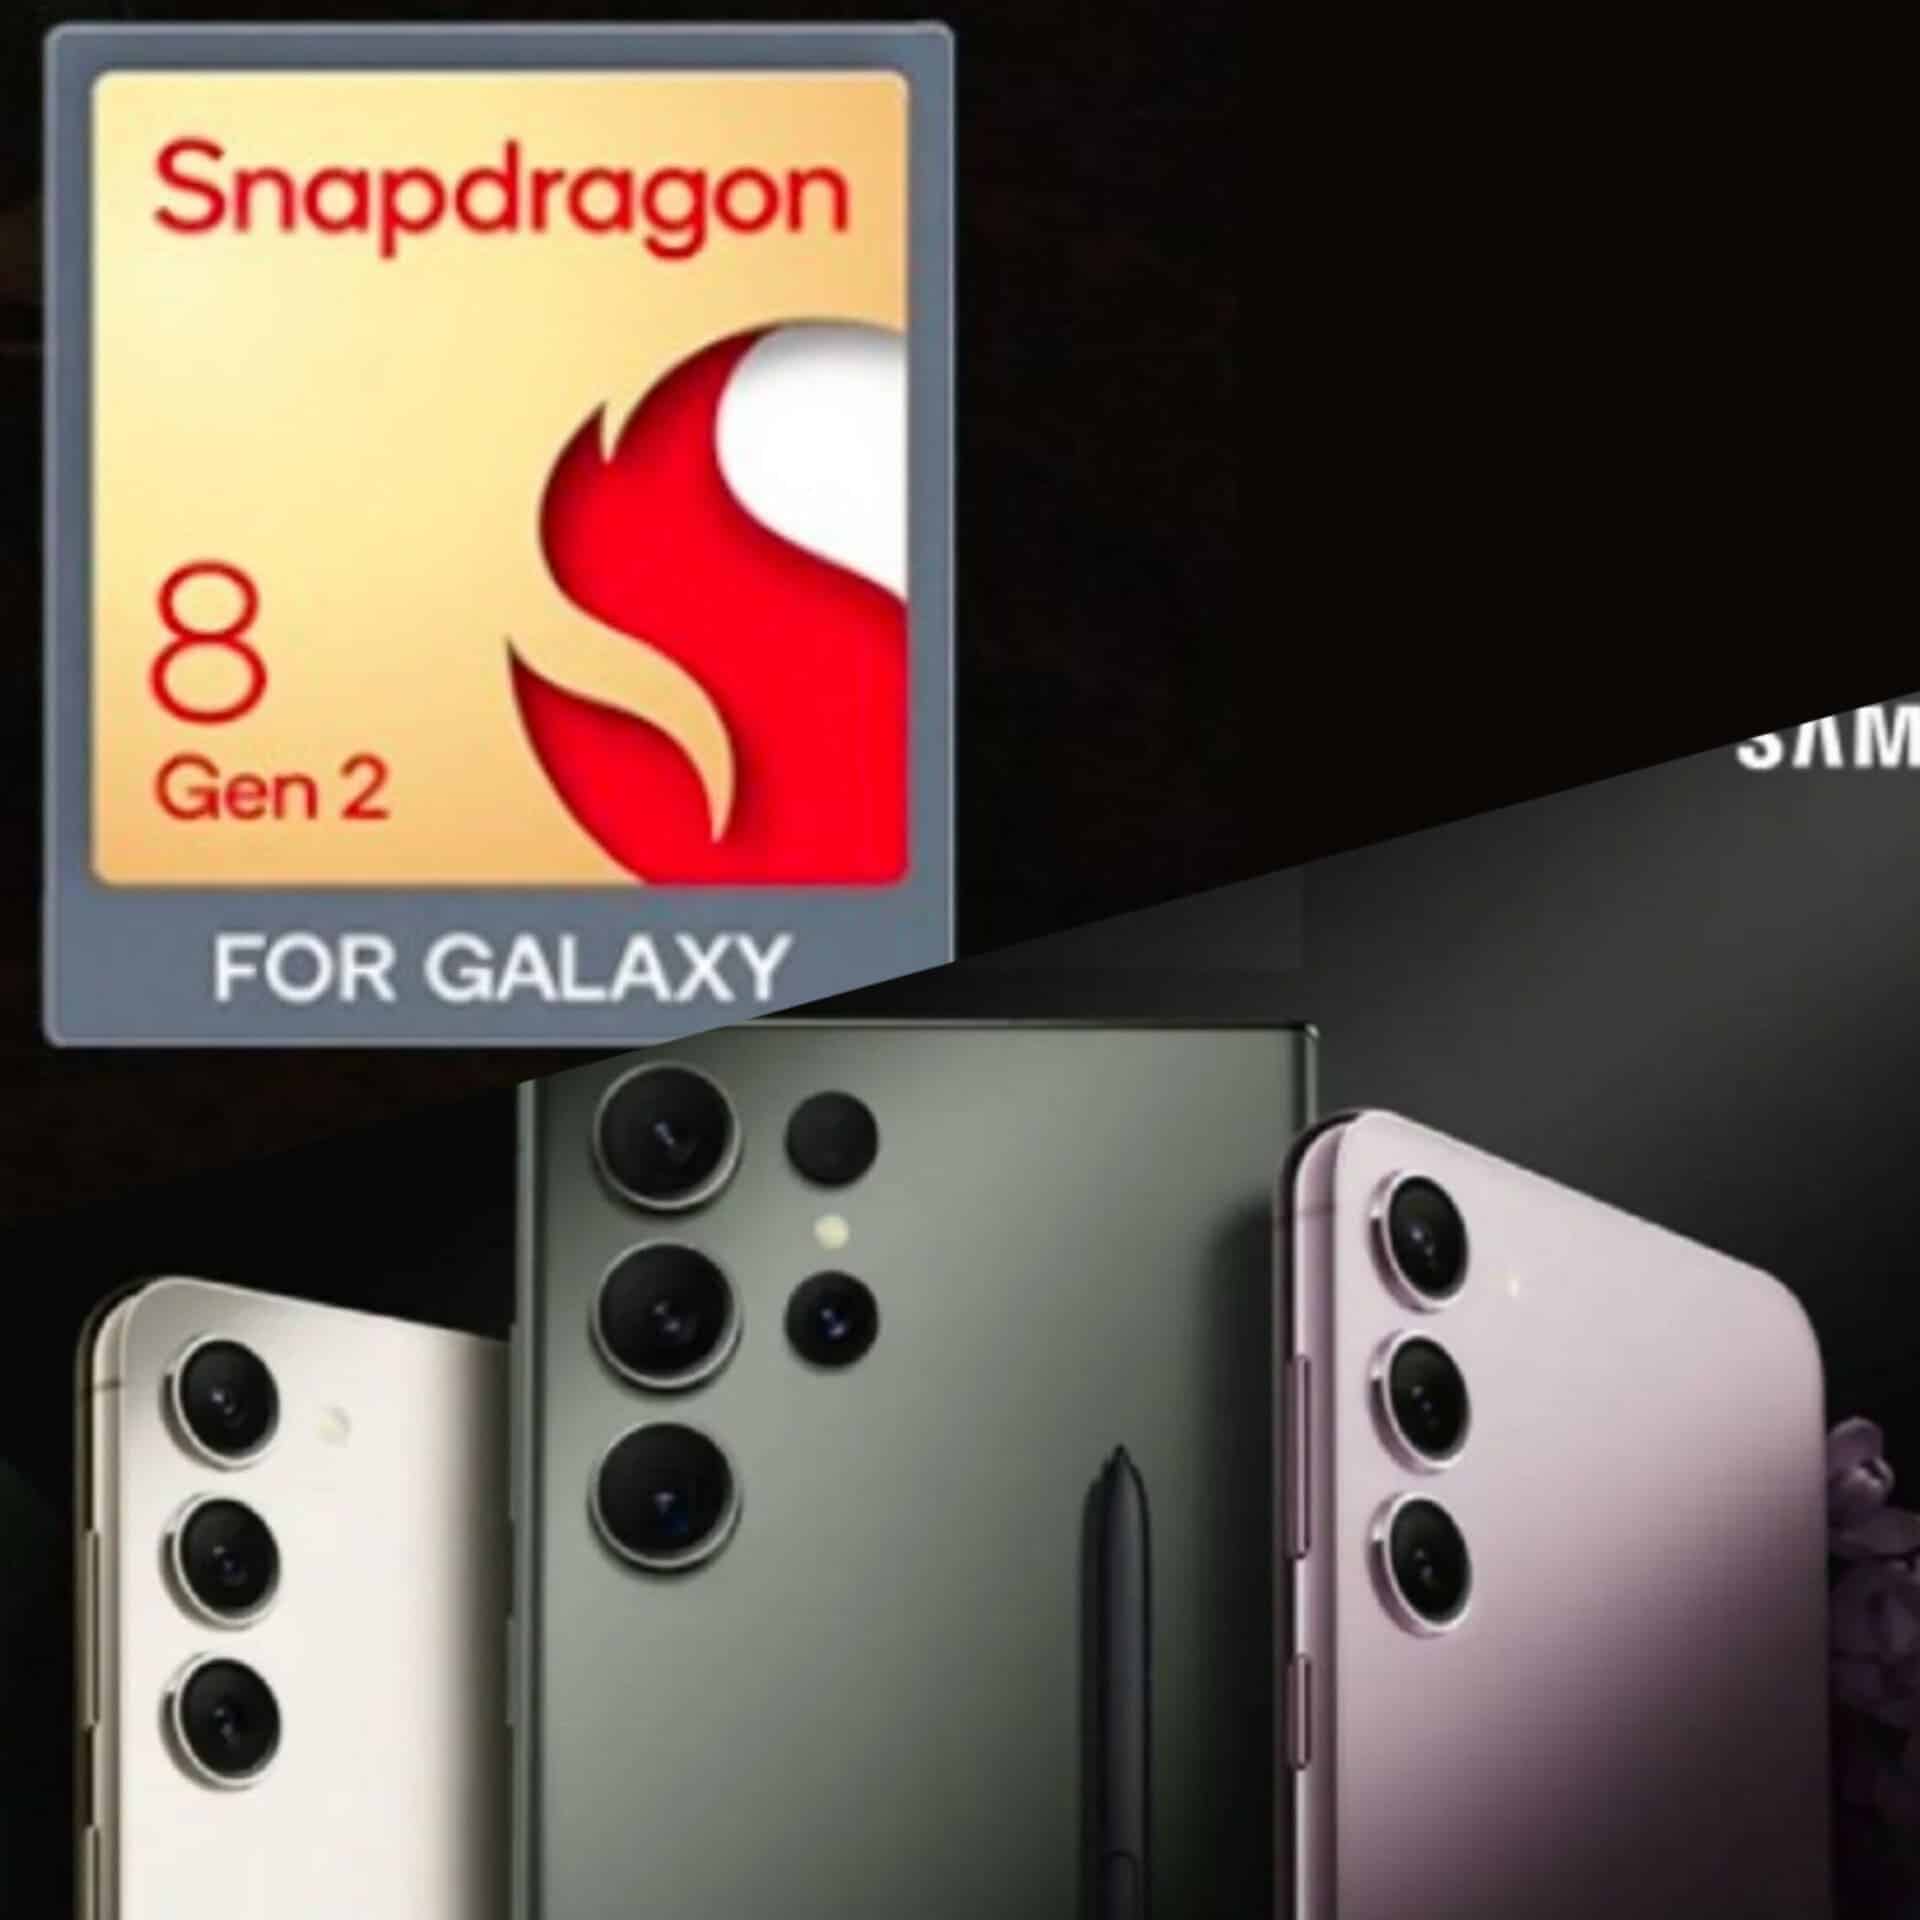 Snapdragon 8 Gen 2 For Galaxy chipset confirmed for Galaxy S23 - SamMobile